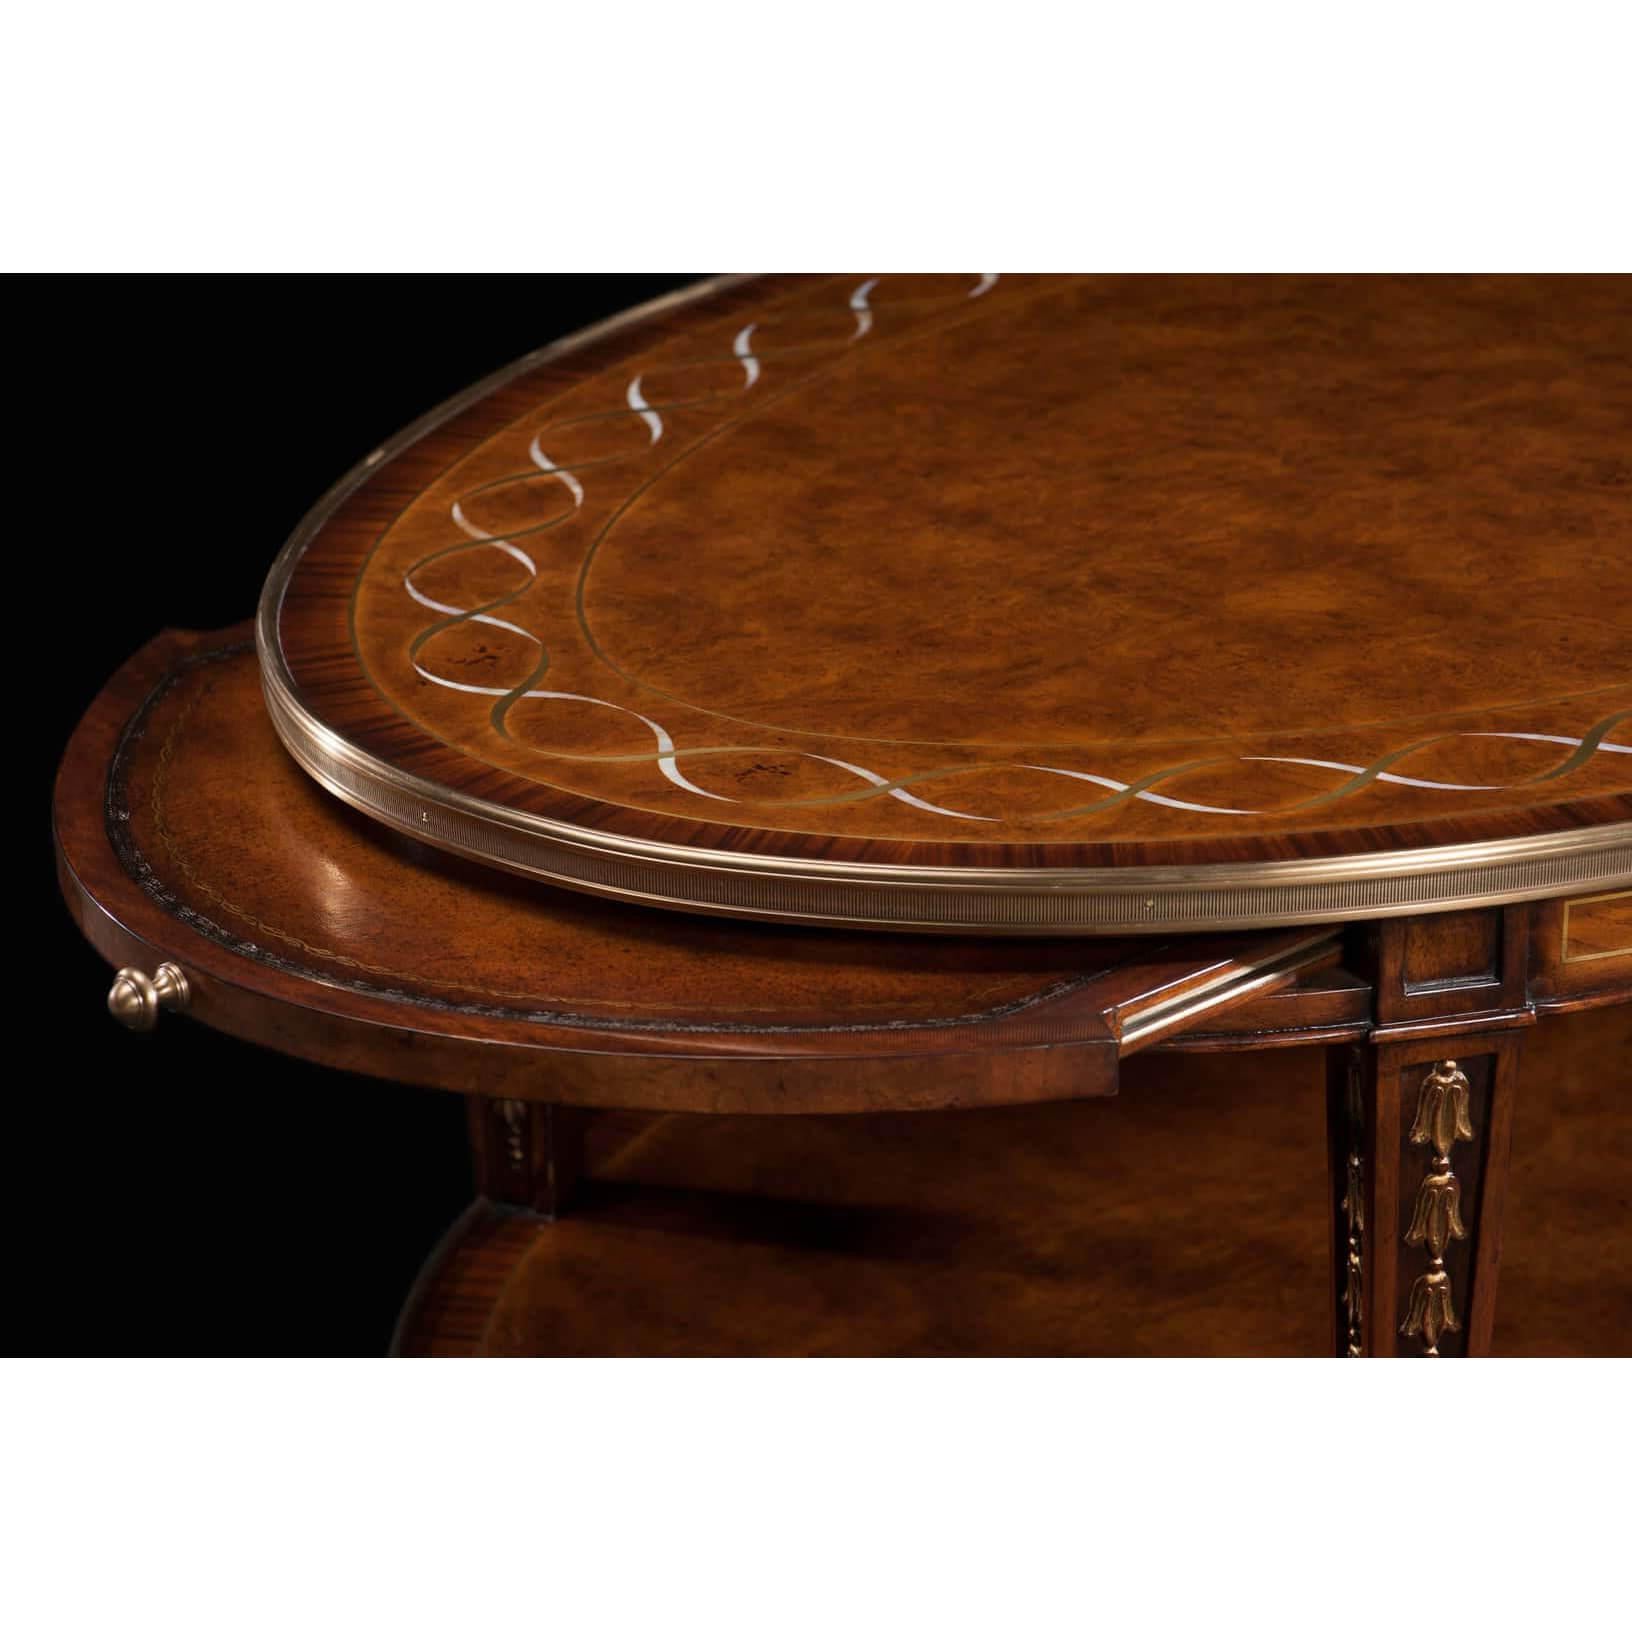 A George II Style oval coffee table with pollard oak burl and Morado banding, mother of pearl and brass inlay to the oval top, end slides, shelf stretcher, on square tapering legs.
Dimensions: 48.25